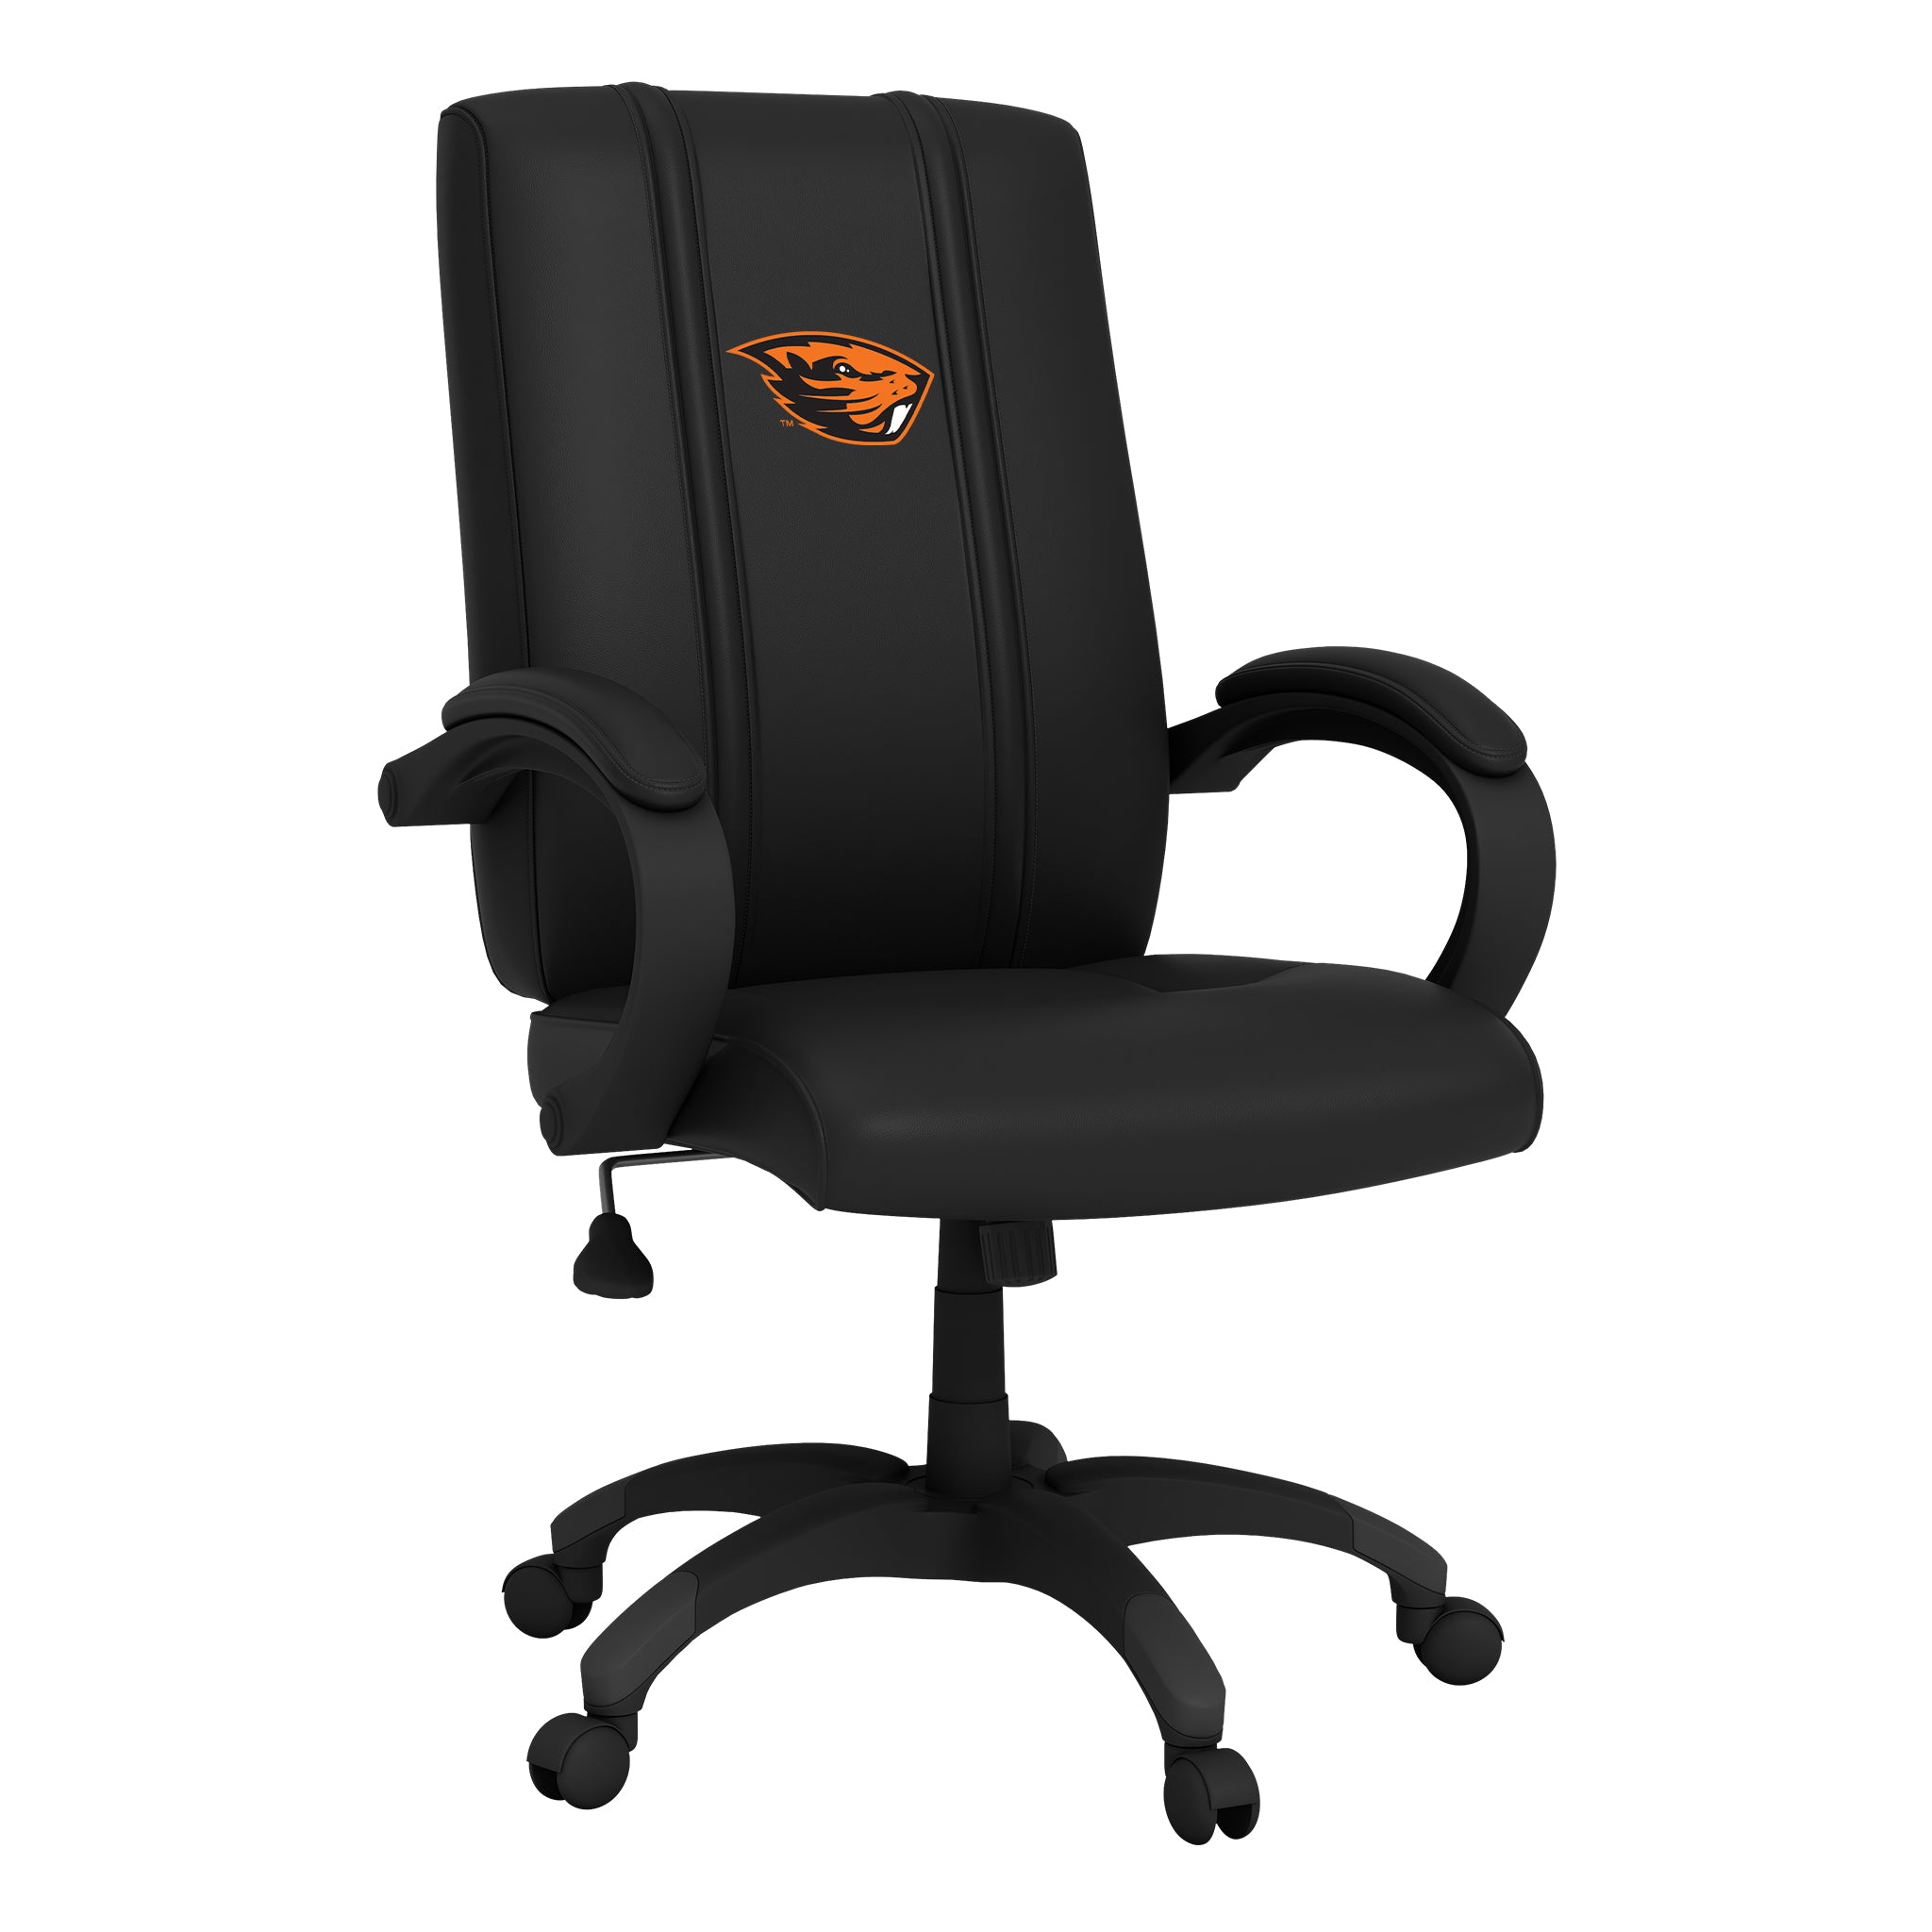 Oregon State Office Chair 1000 with Oregon State University Beavers Logo